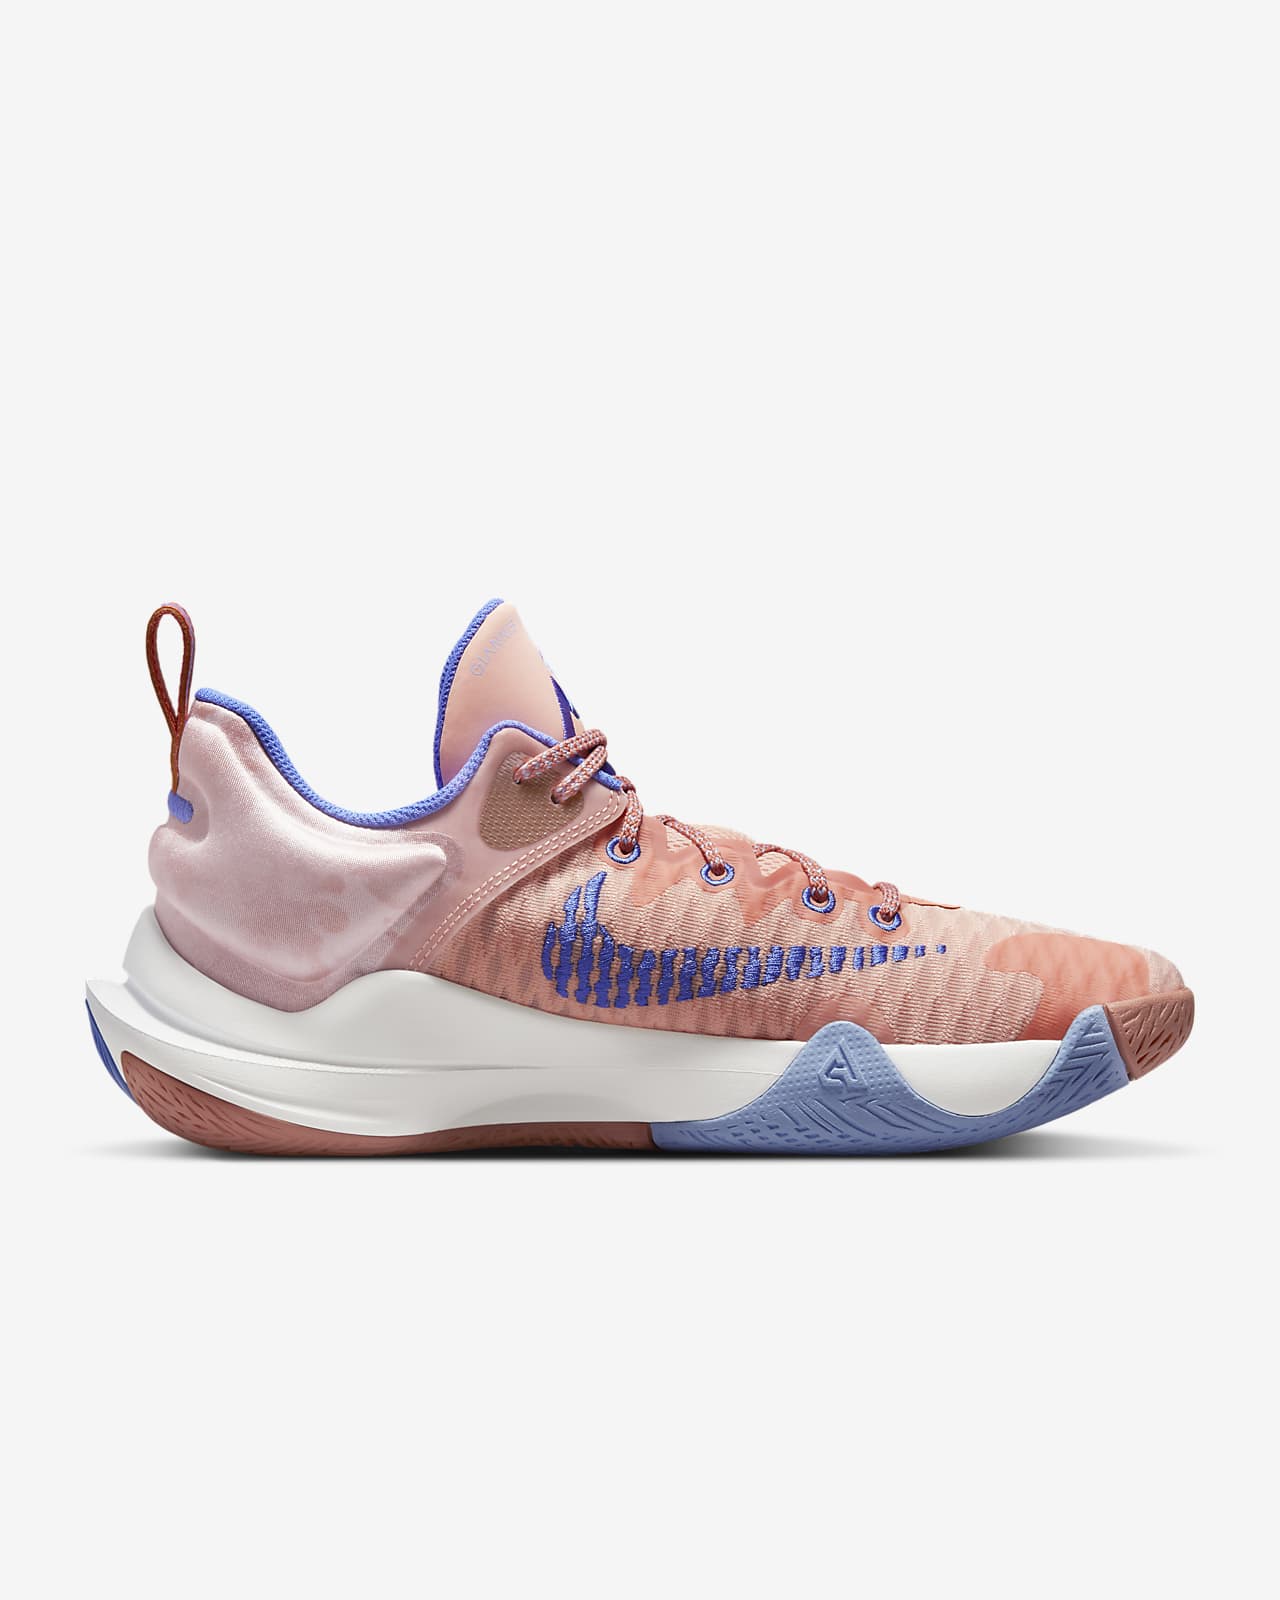 giannis sneakers | Giannis Immortality Basketball Shoes. Nike.com